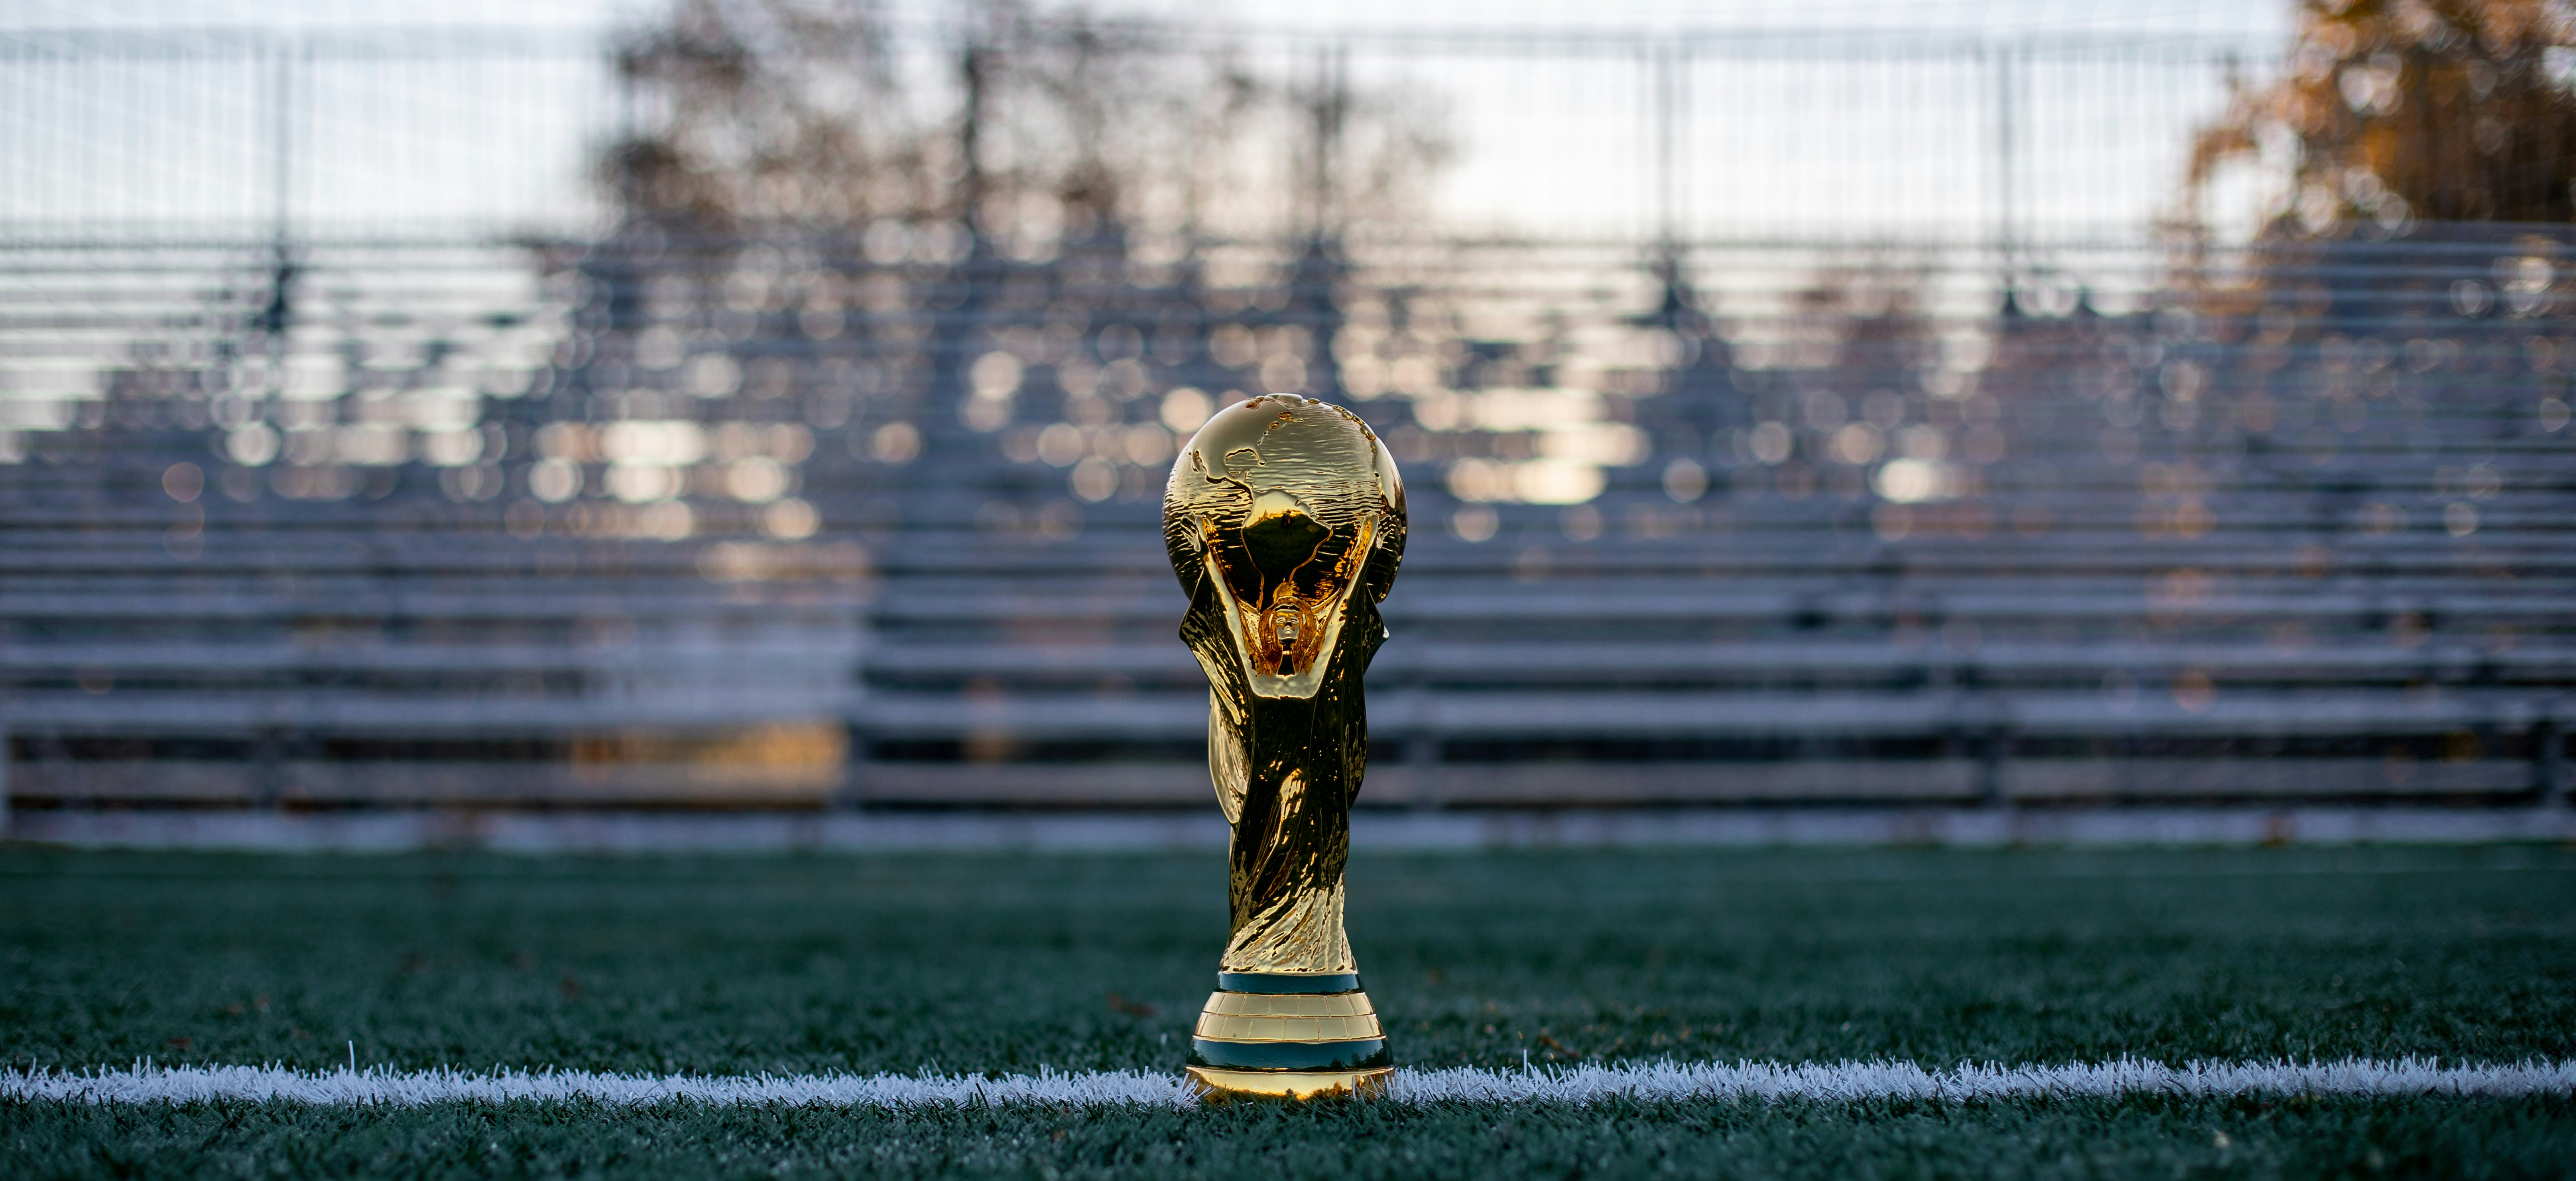 2022 world cup trophy with the bleachers in the background